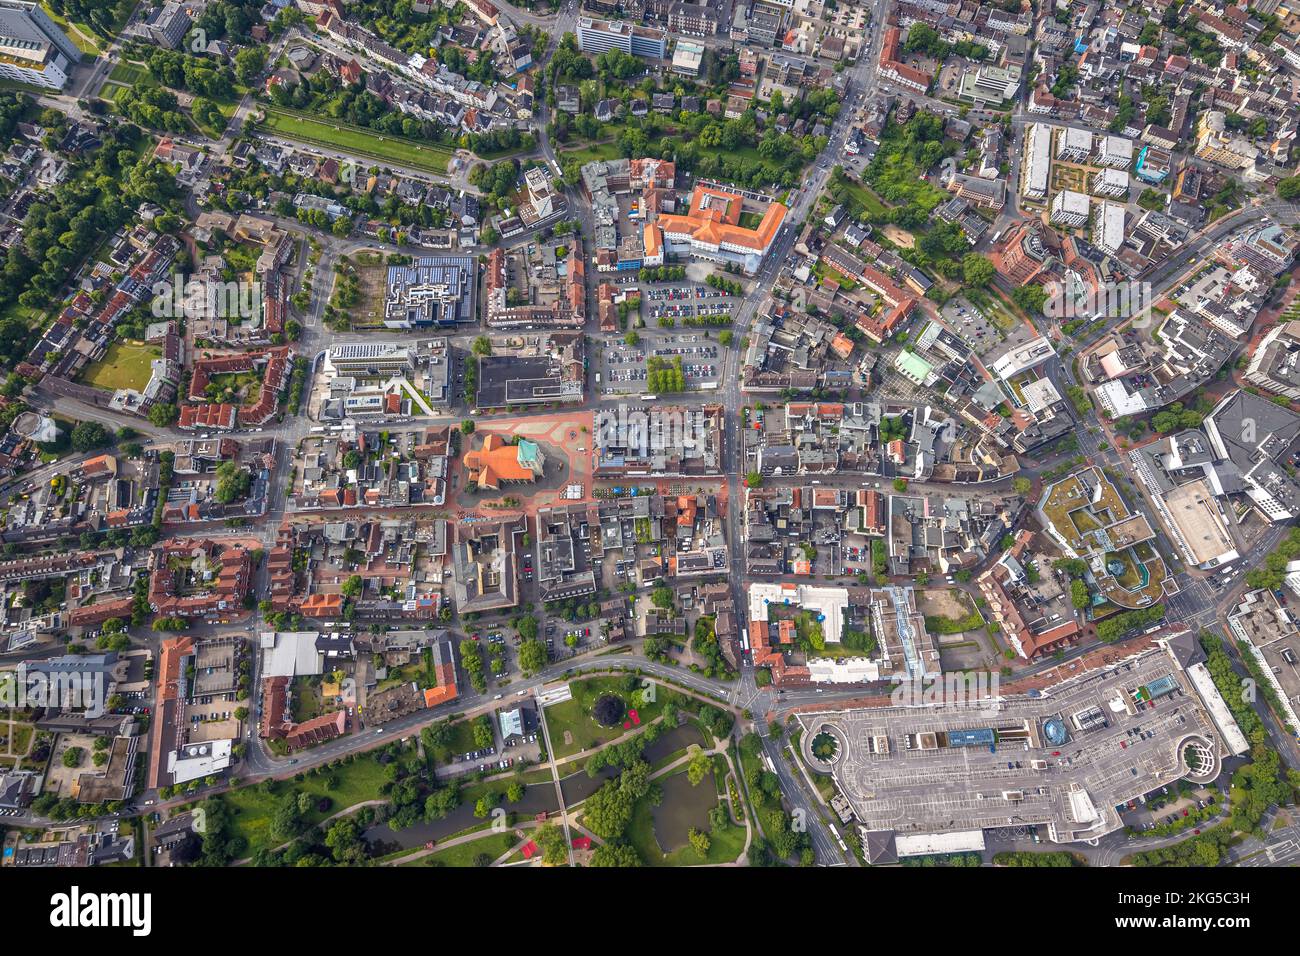 Aerial view, city center view with evang. Pauluskirche and St. Marien-Hospital, Allee-Center, Mitte, Hamm, Ruhrgebiet, North Rhine-Westphalia, Germany Stock Photo